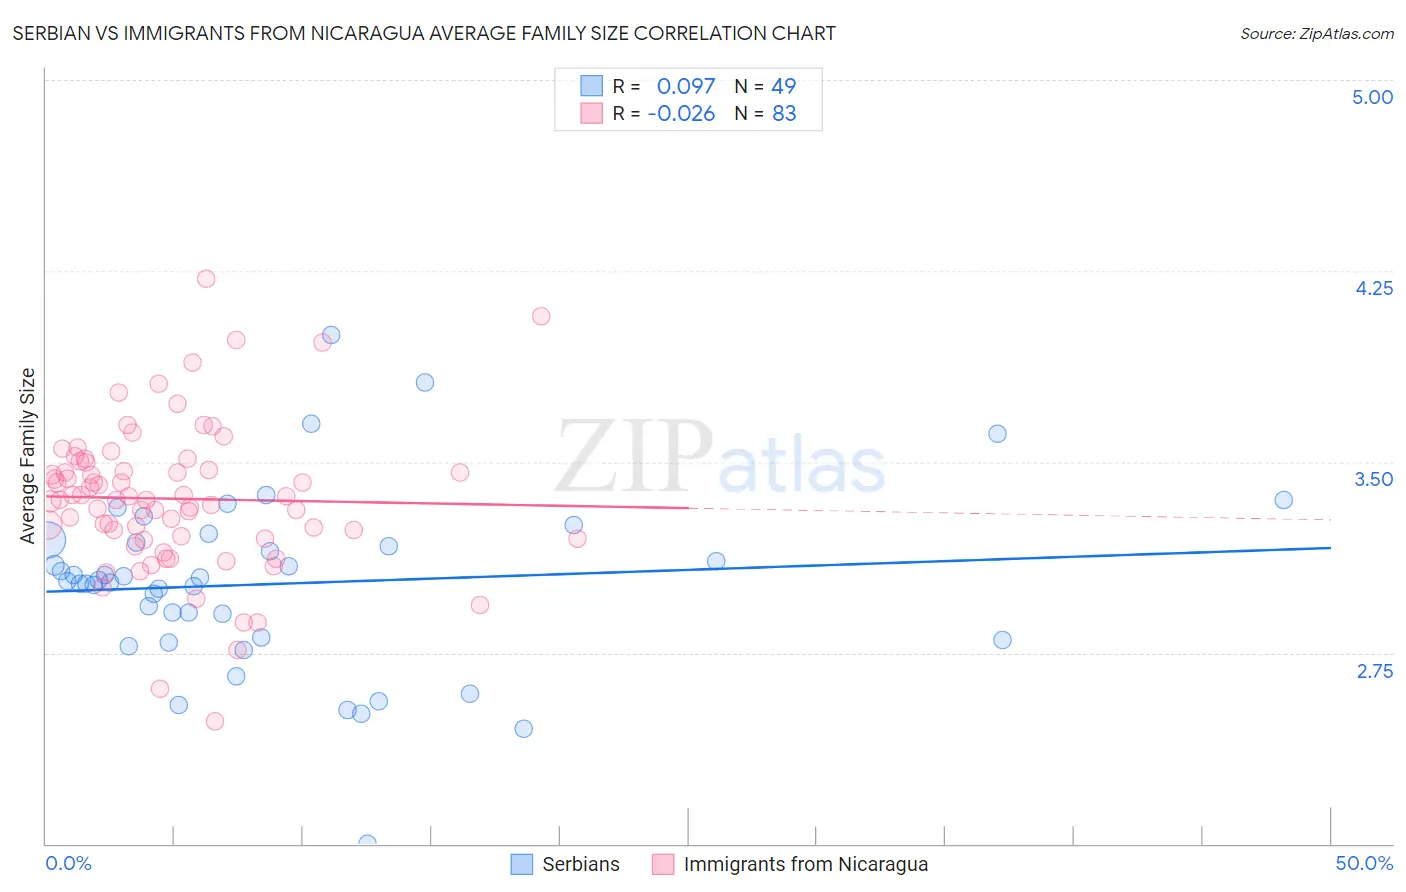 Serbian vs Immigrants from Nicaragua Average Family Size